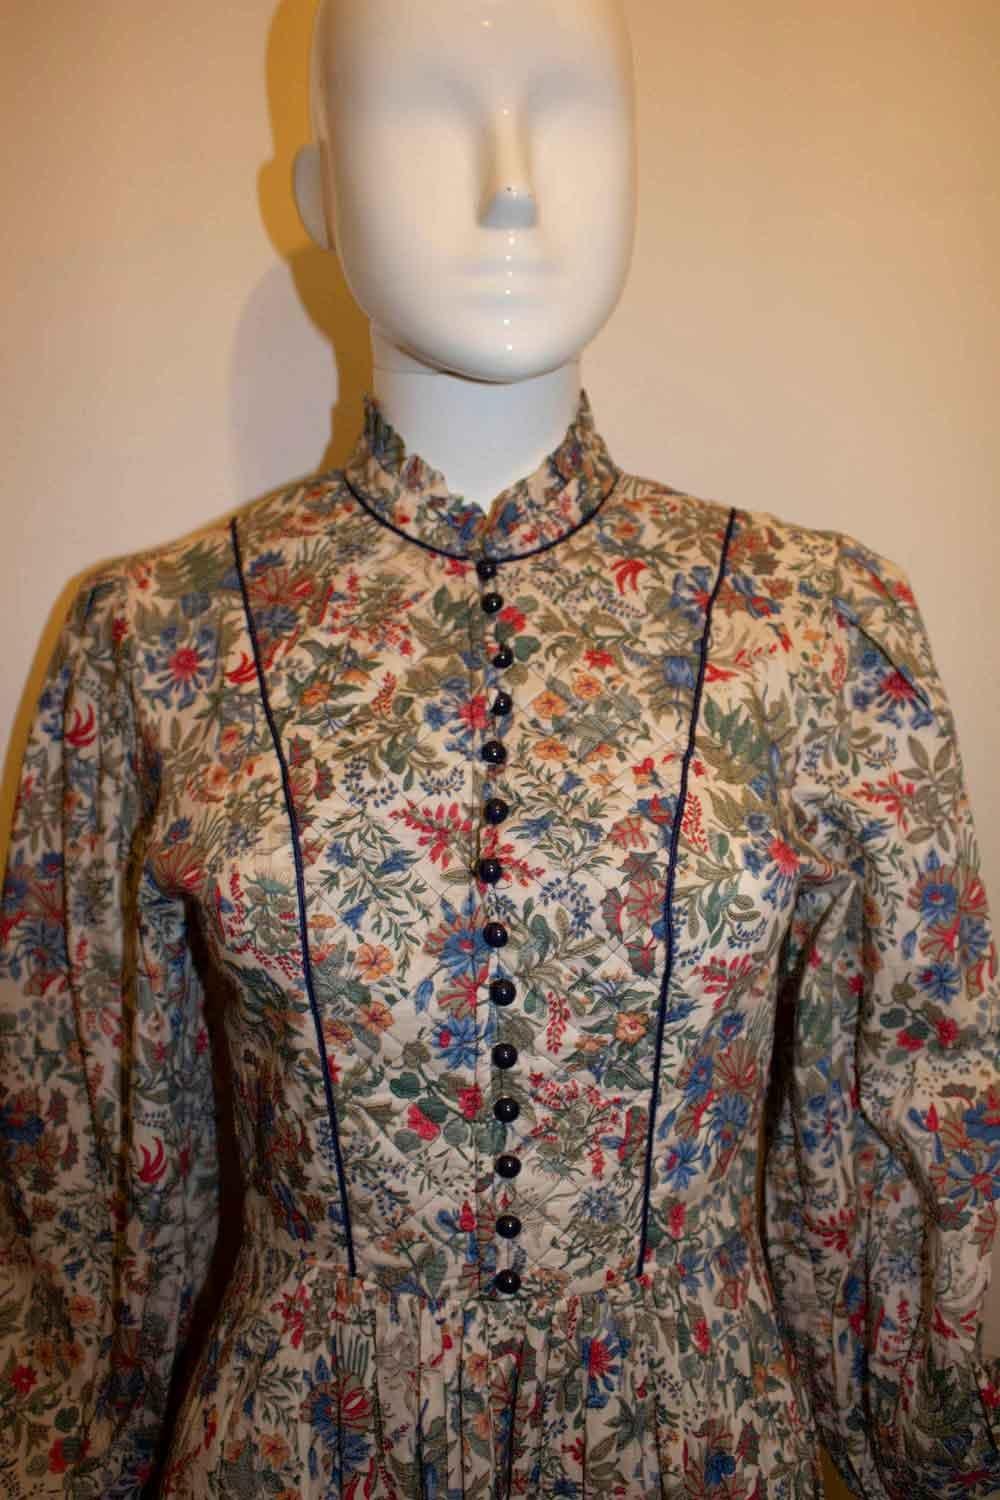 A very pretty vintage dress by Liberty . In lawn cotton the dress has ruffle detail at the neck, quilt detail on the front and cuffs, a front button opening and a back zip plus a self fabric tie belt. 
It is unlined. Size 10 measurements : bust up